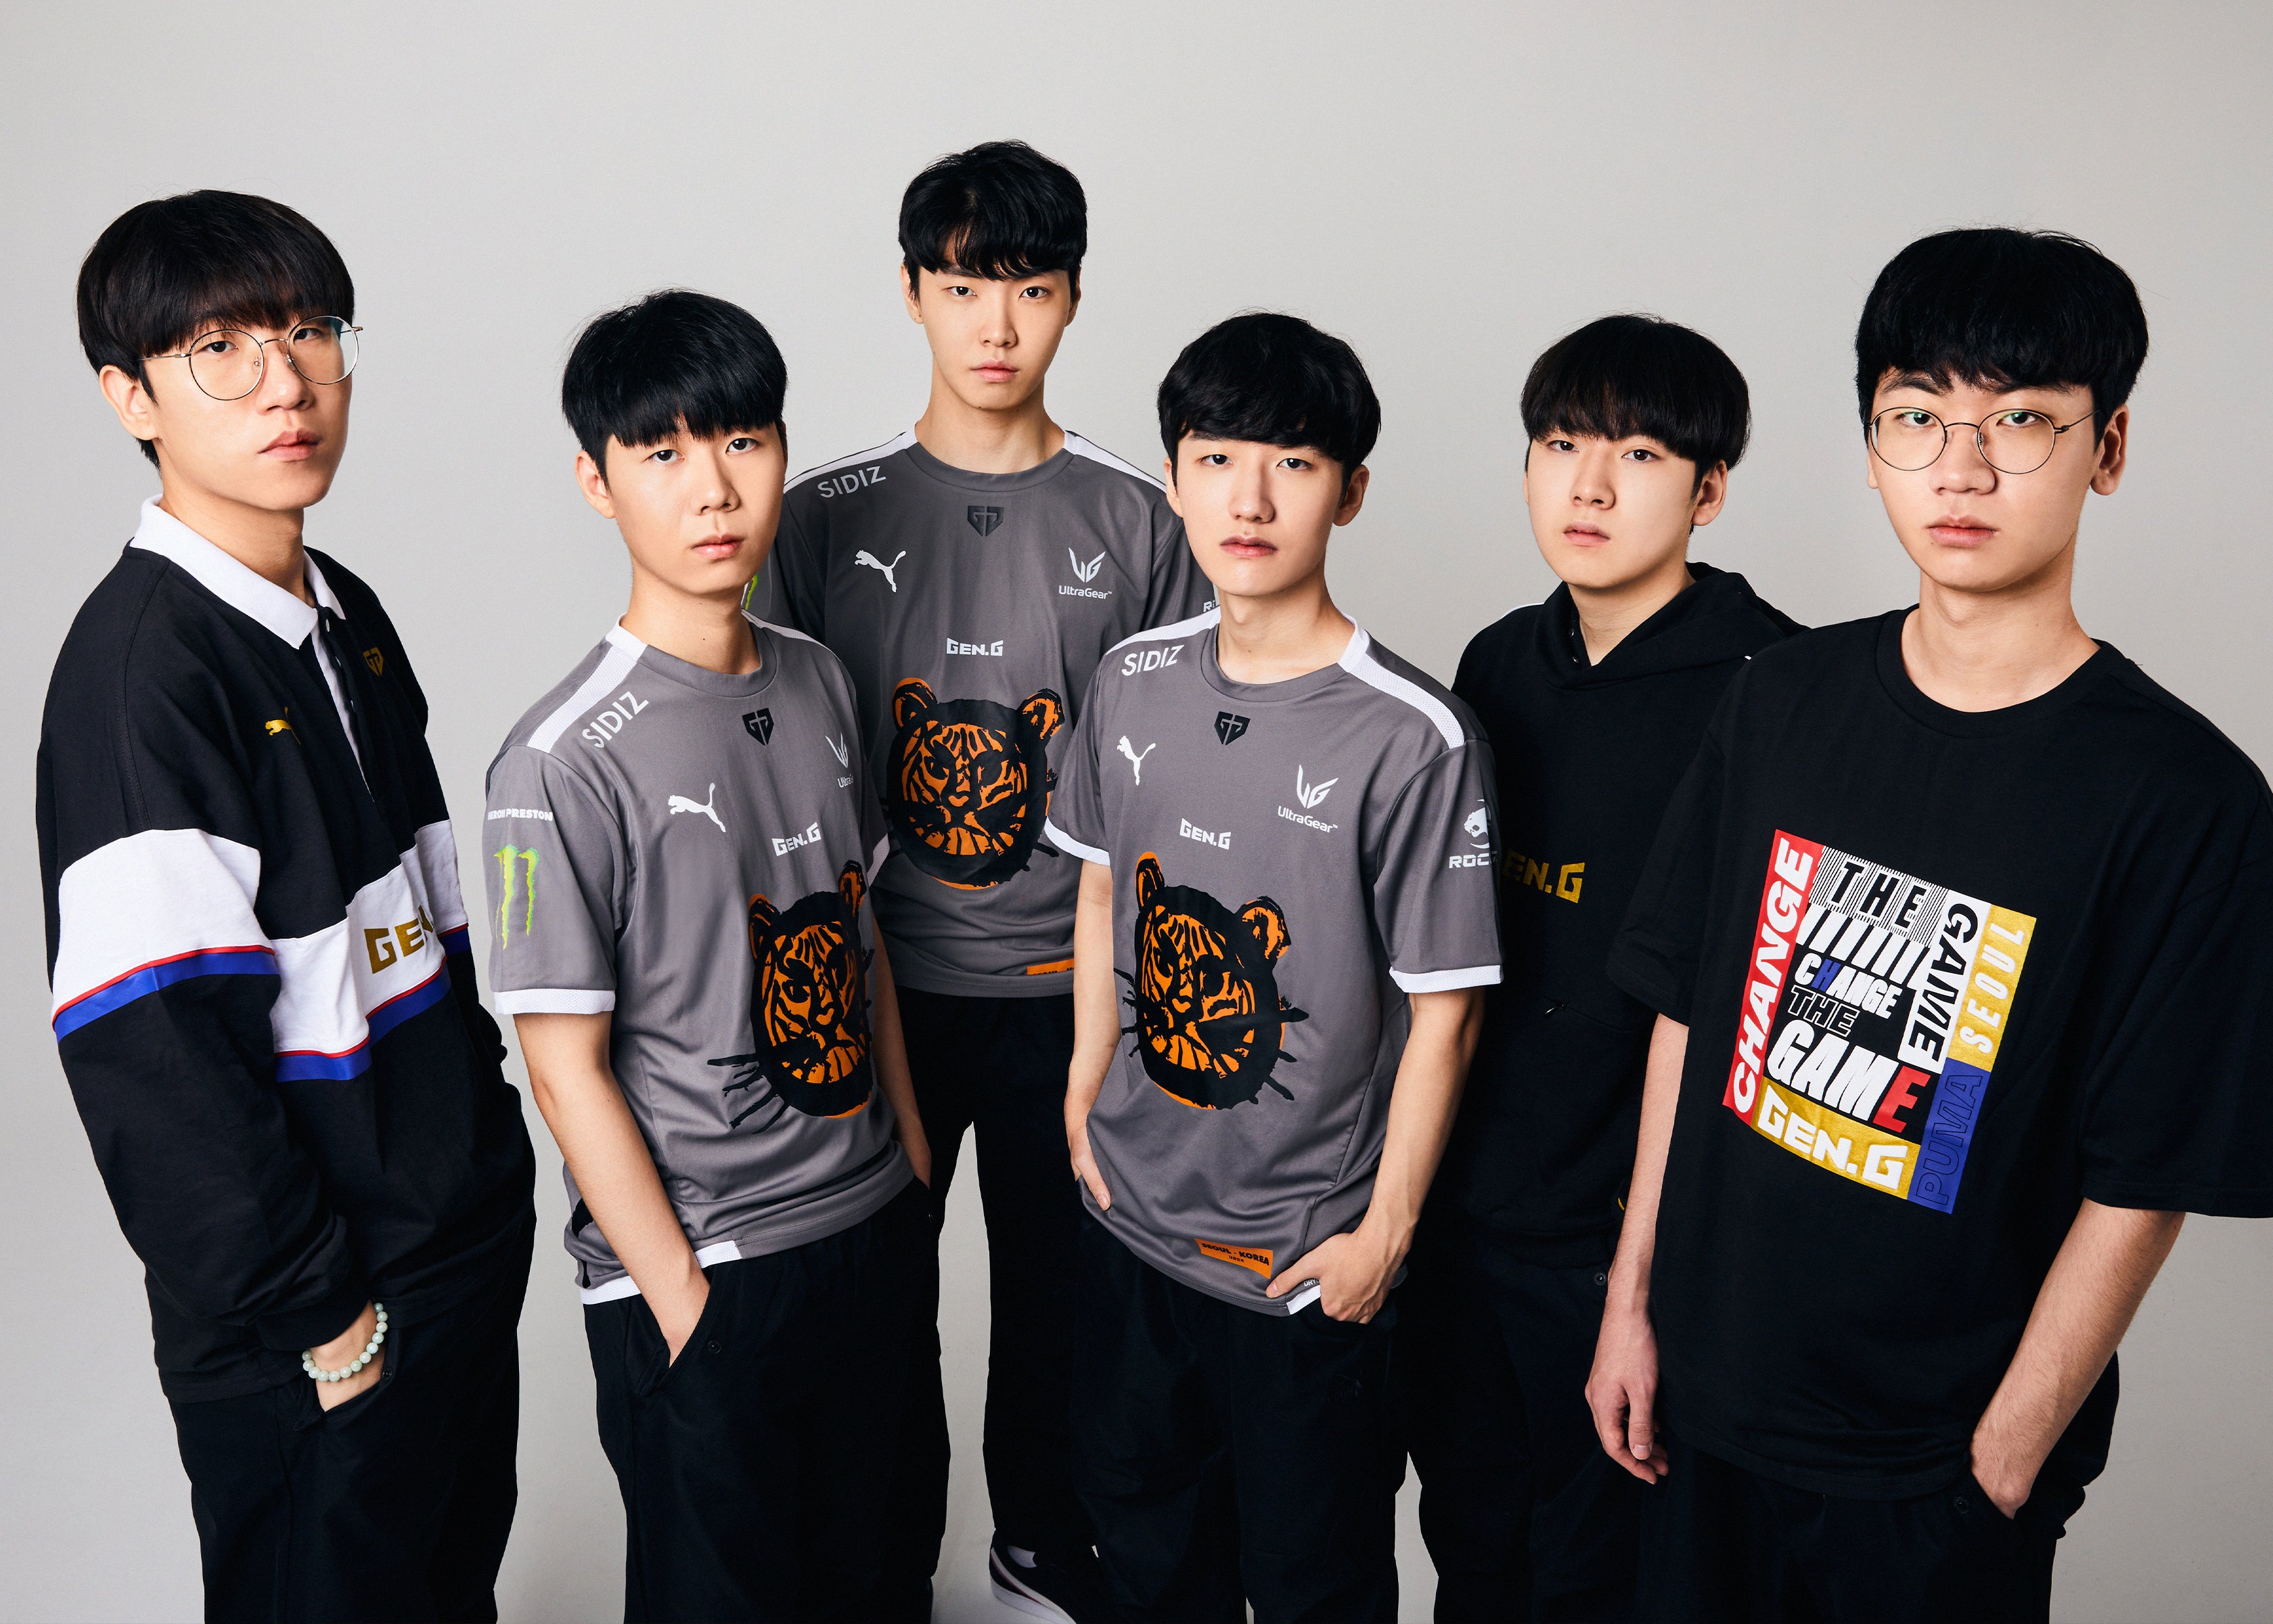 Gen.G announces League of Legends Worlds theme song and jersey